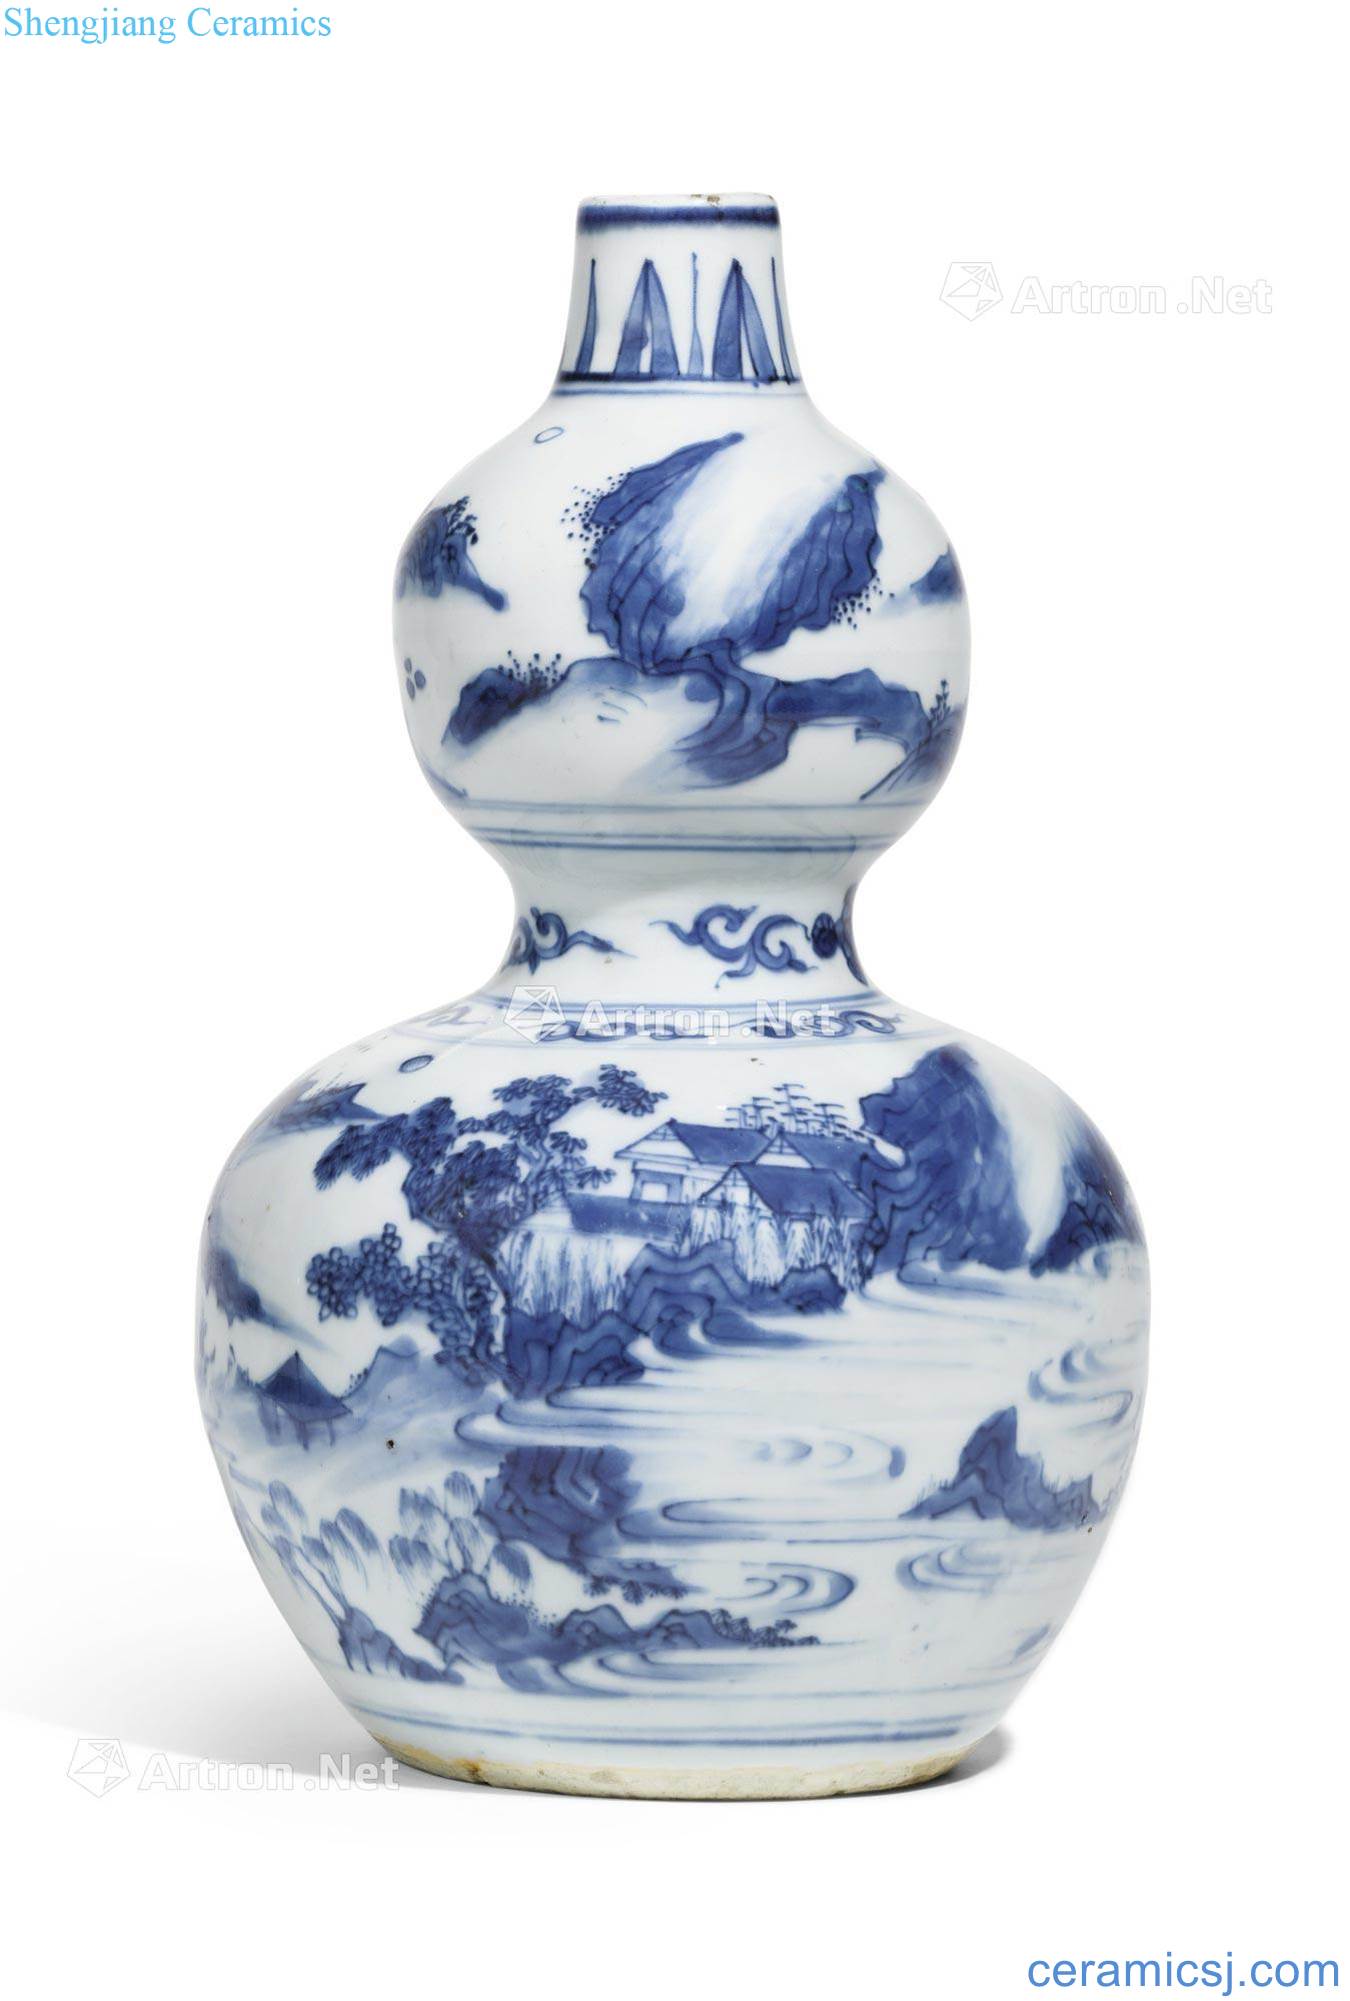 In the 17th century Blue and white landscape character figure gourd bottle